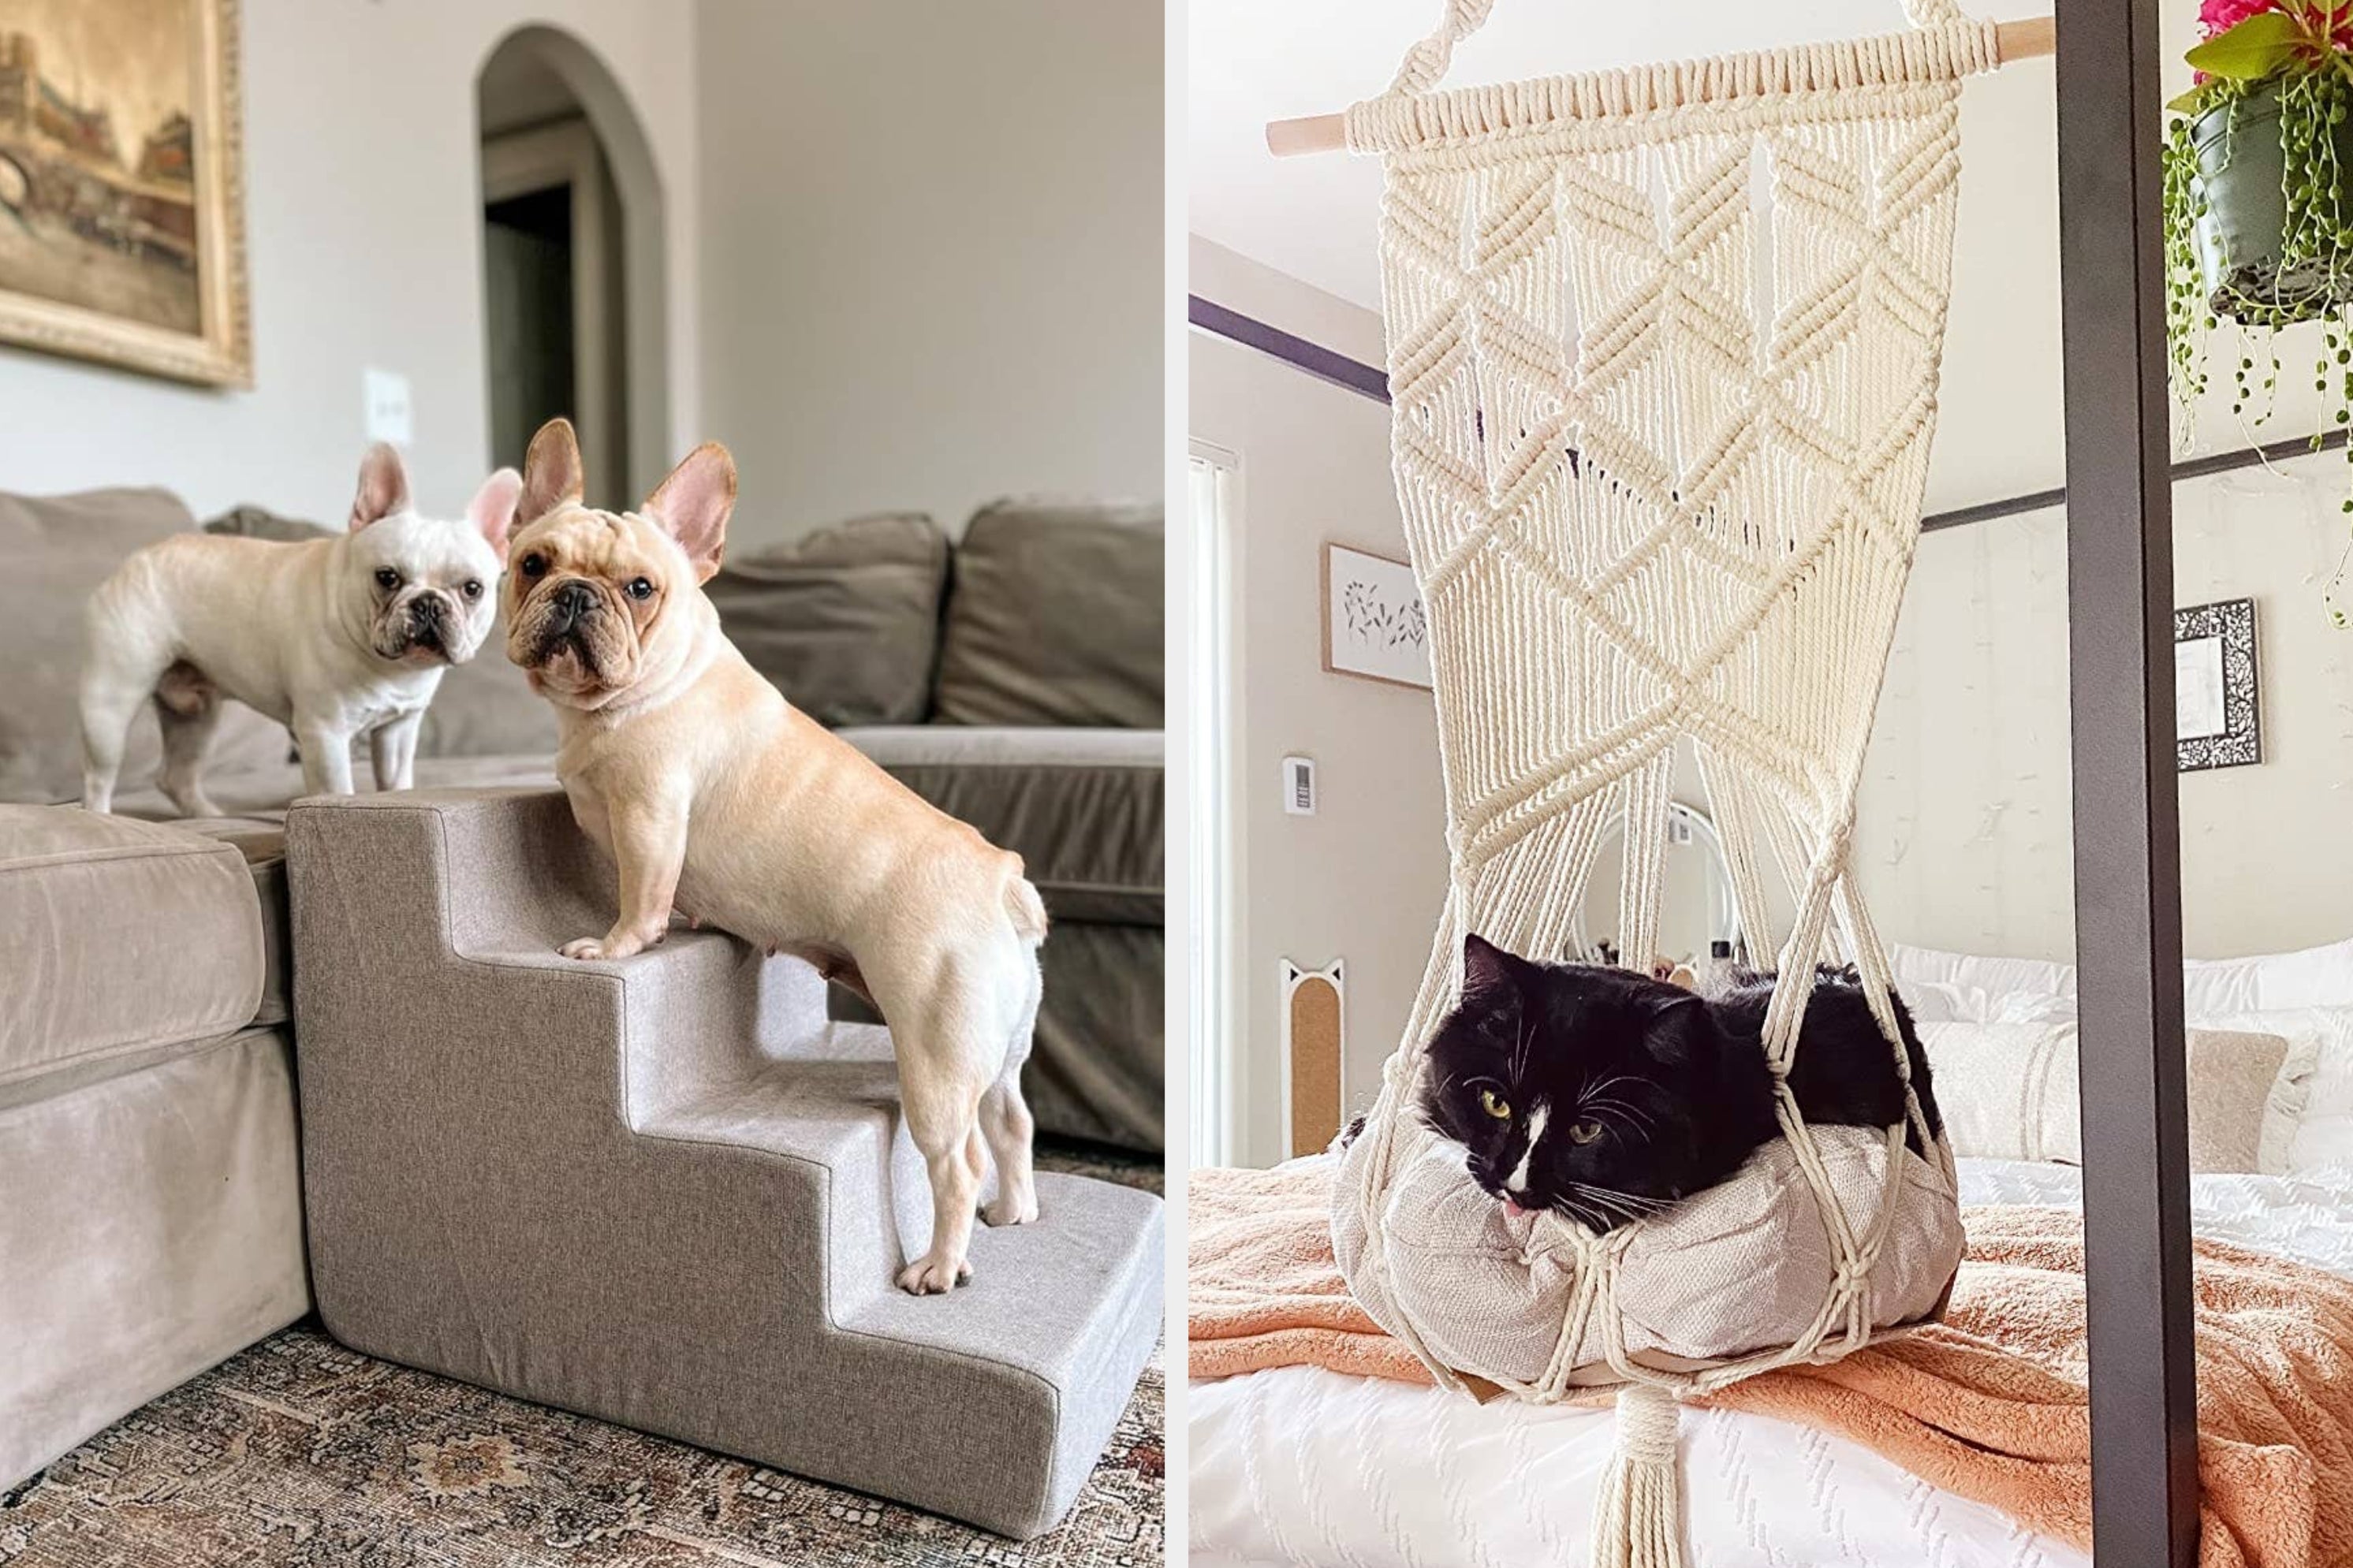 29 Pet Products That'll Actually Complement Your Home Decor